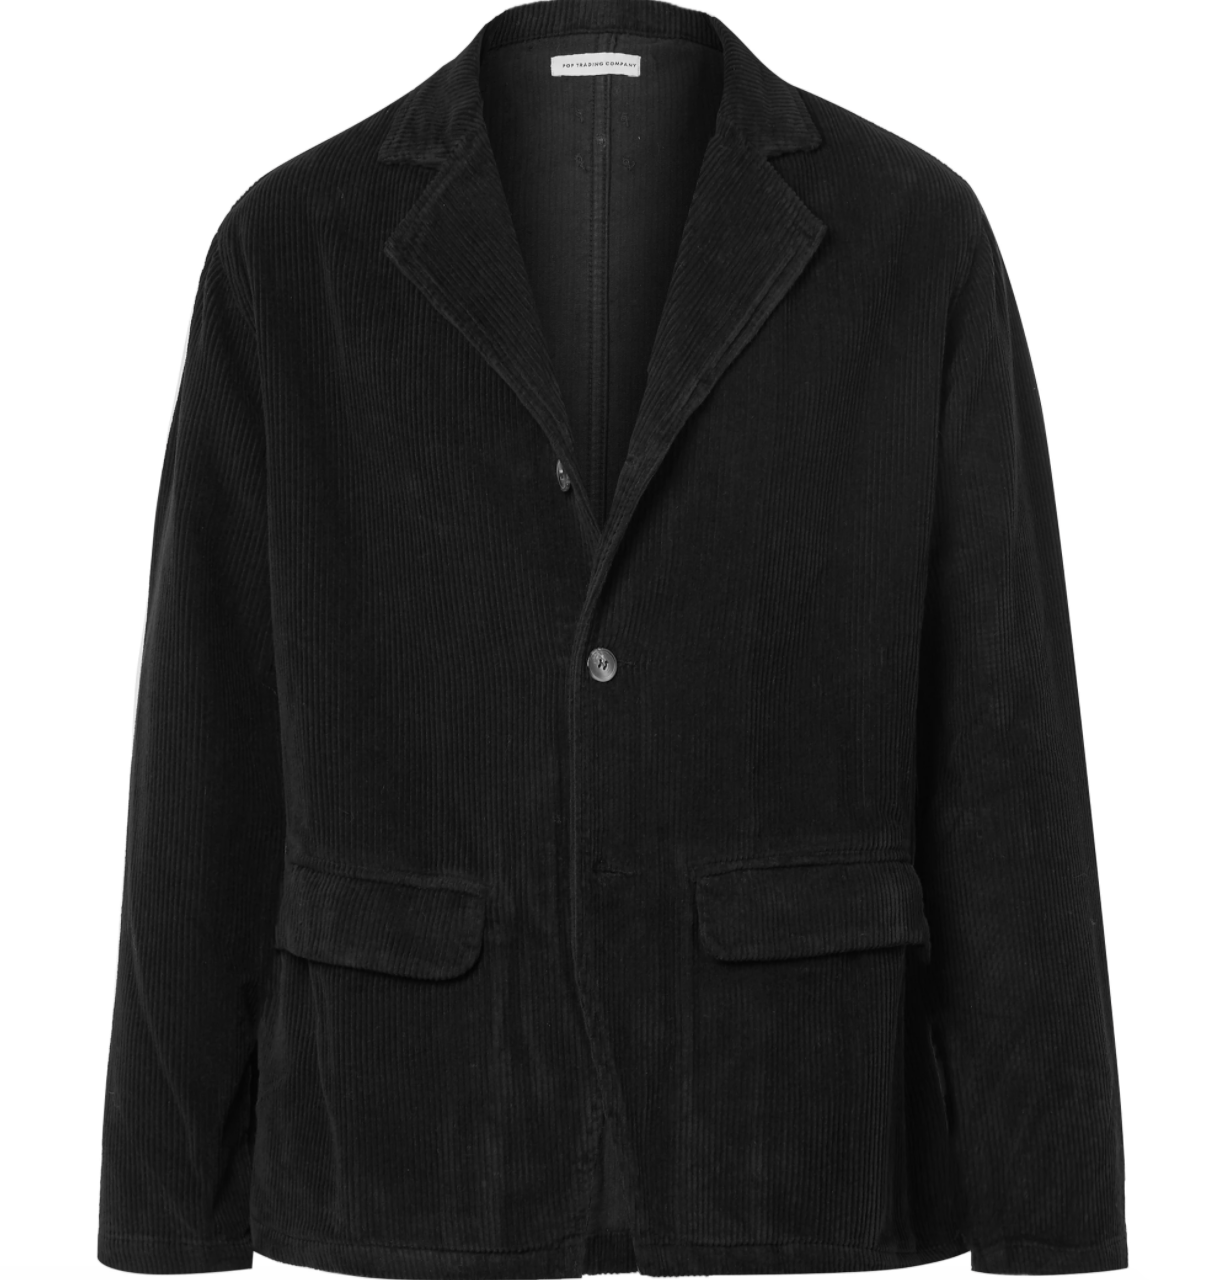 Pop Trading Company Hewitt Unstructured Jacket